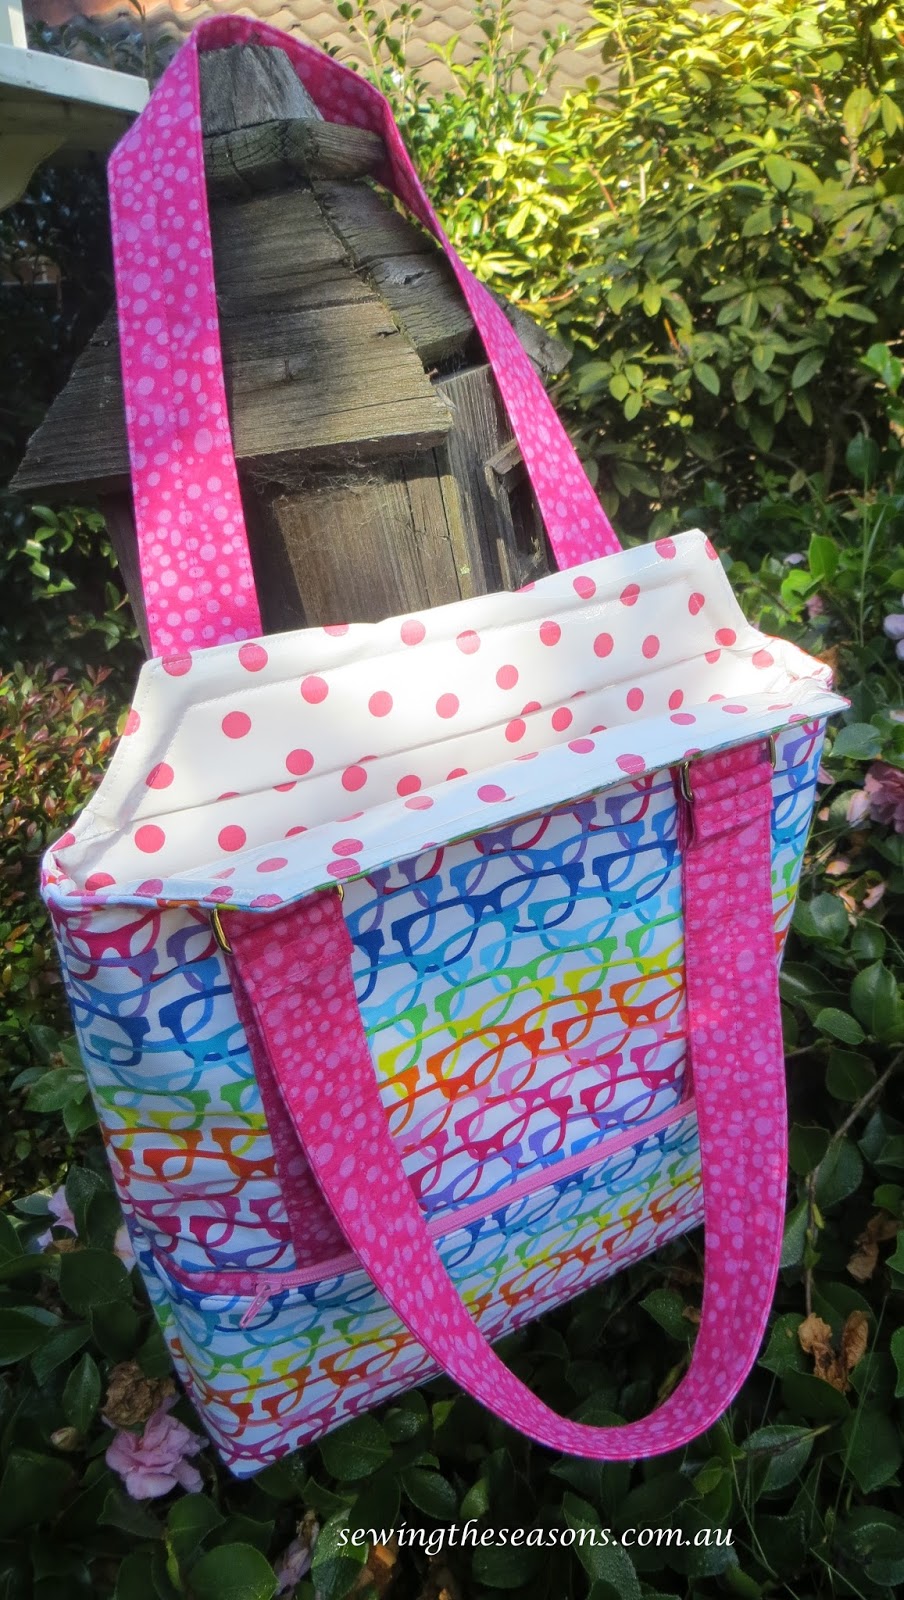 Sewing The Seasons: Pattern Test - Heavy Hauler Tote Bag by Two Pretty ...